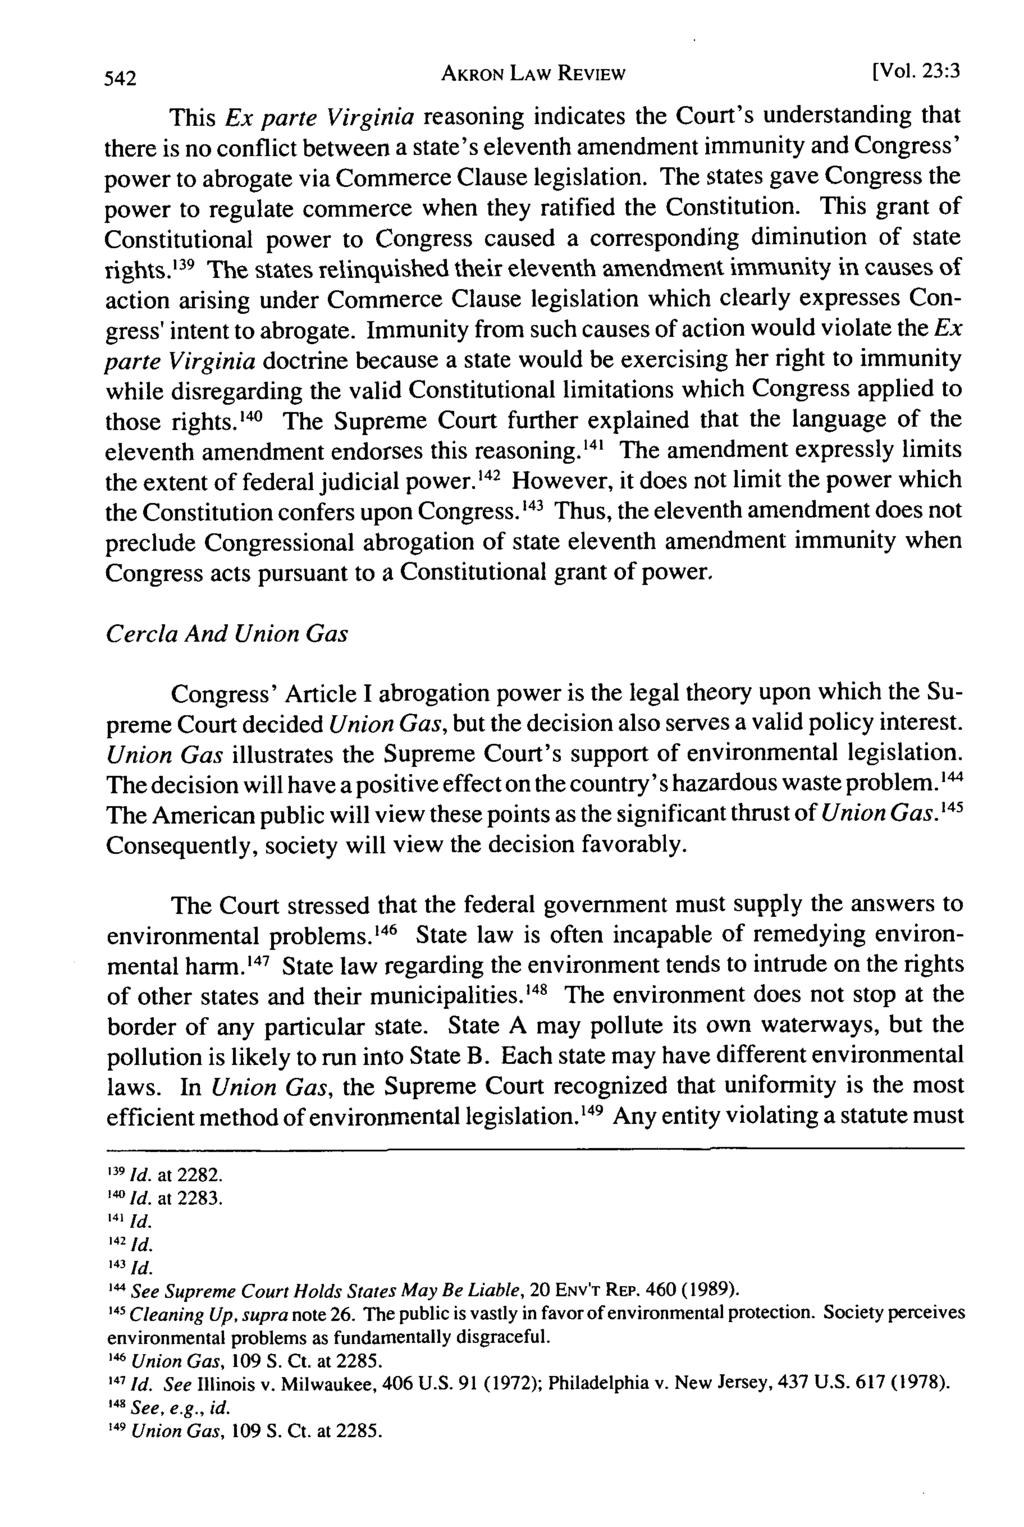 This Ex parte Virginia reasoning indicates the Court's understanding that there is no conflict between a state's eleventh amendment immunity and Congress' power to abrogate via Commerce Clause